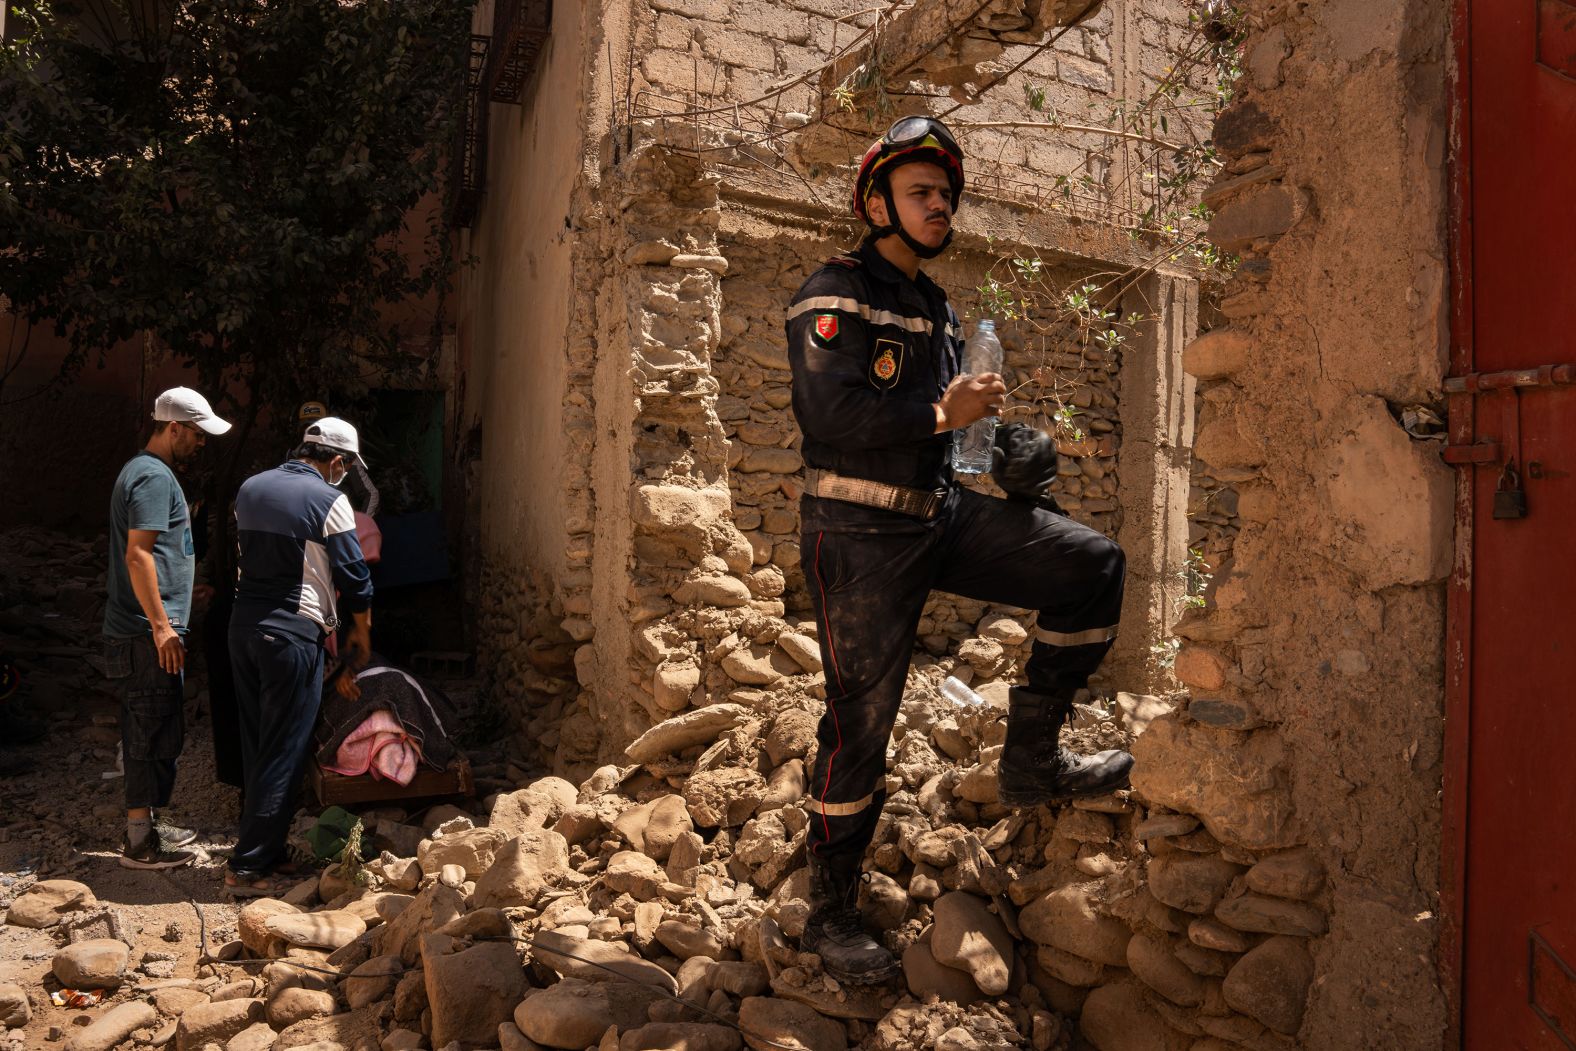 A firefighter drinks water in Amizmiz after the 84-year-old woman's body was pulled from the rubble.